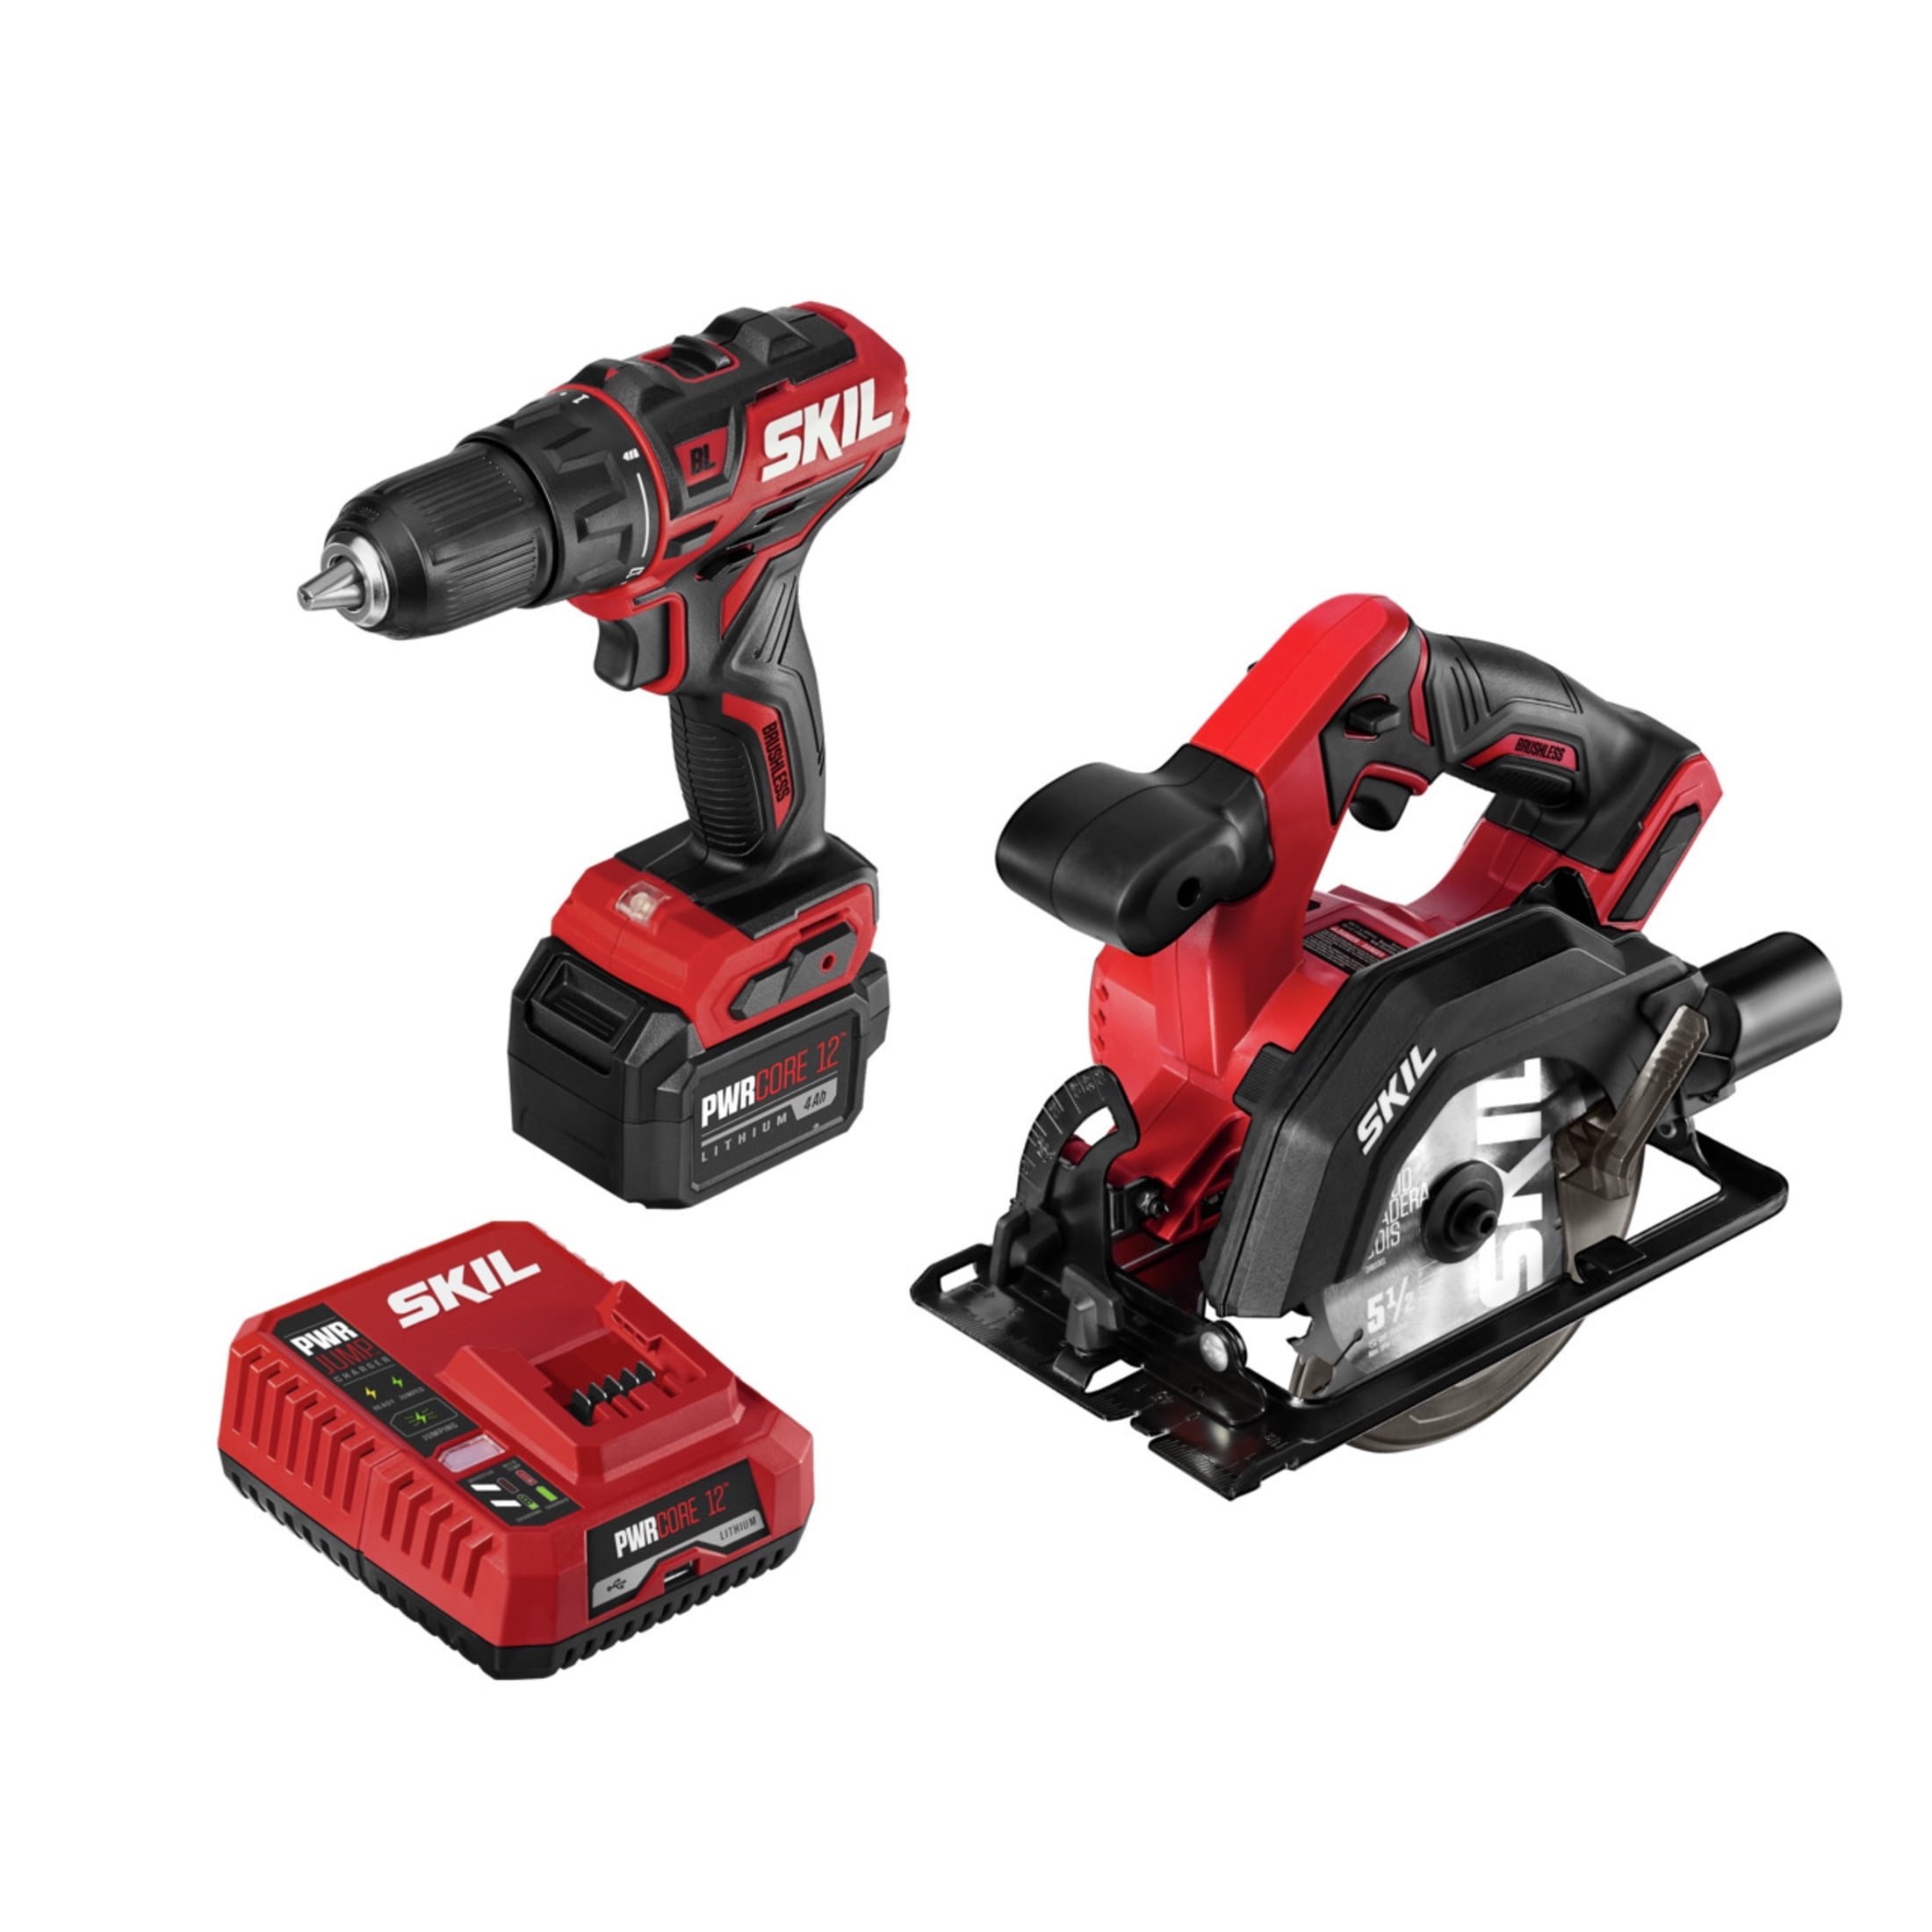 SKIL PWR Core 20™ Brushless 20 Volt Cordless 4-Tool Kit: Drill Driver,  Circular Saw, Multi Tool & Speaker with 4.0Ah PWR ASSIST™ Battery